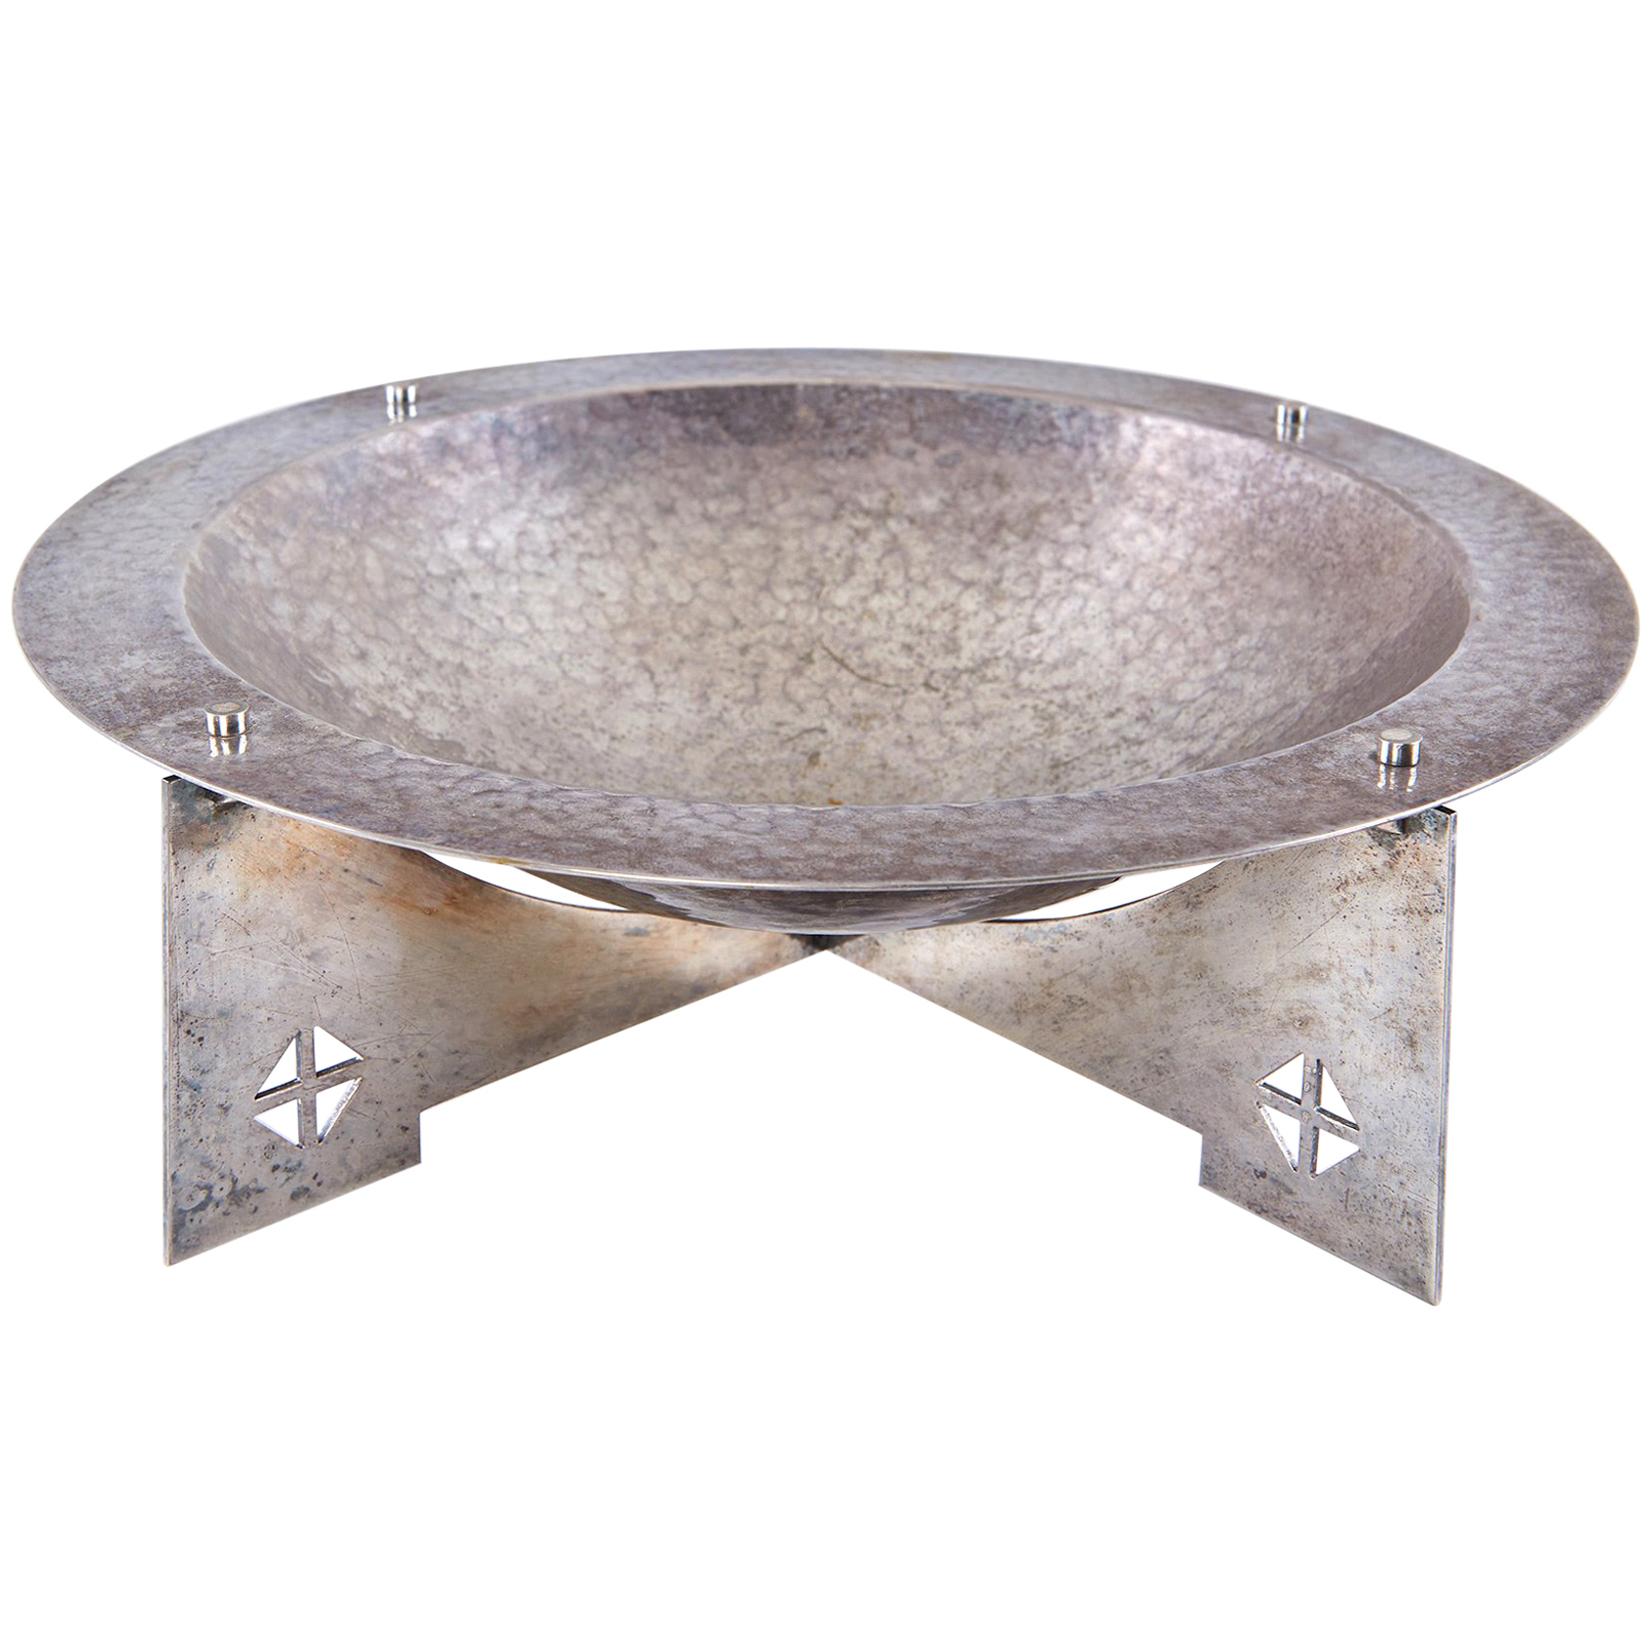 Silver-Plated "Courtney" Bowl by Charles Gwathmey and Robert Siegel